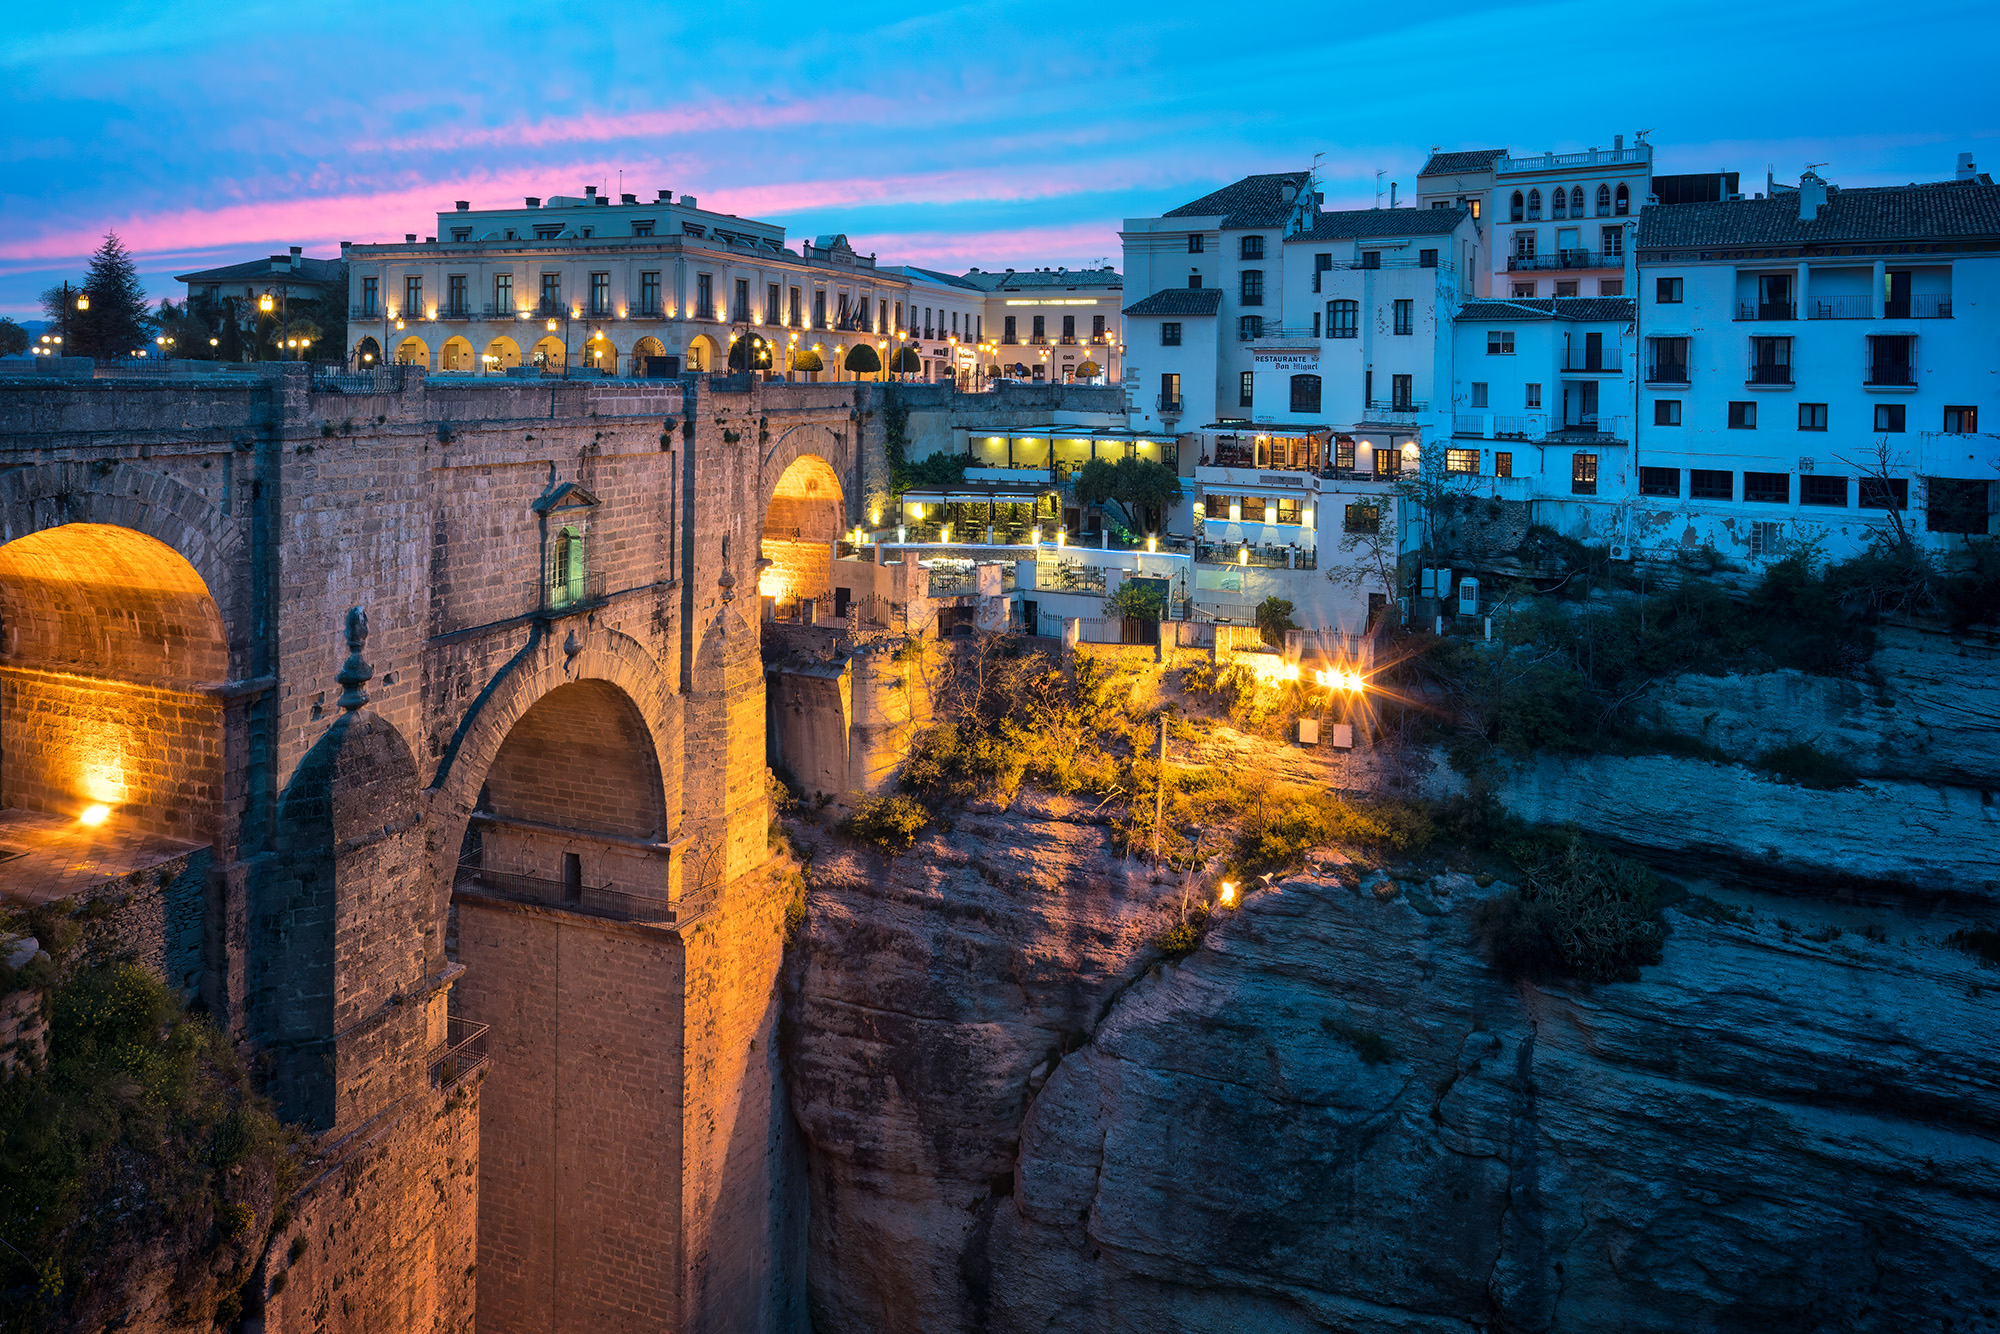 As the day gently faded into the evening's embrace, I captured this enchanting scene during the blue hour in Ronda, Spain. The...